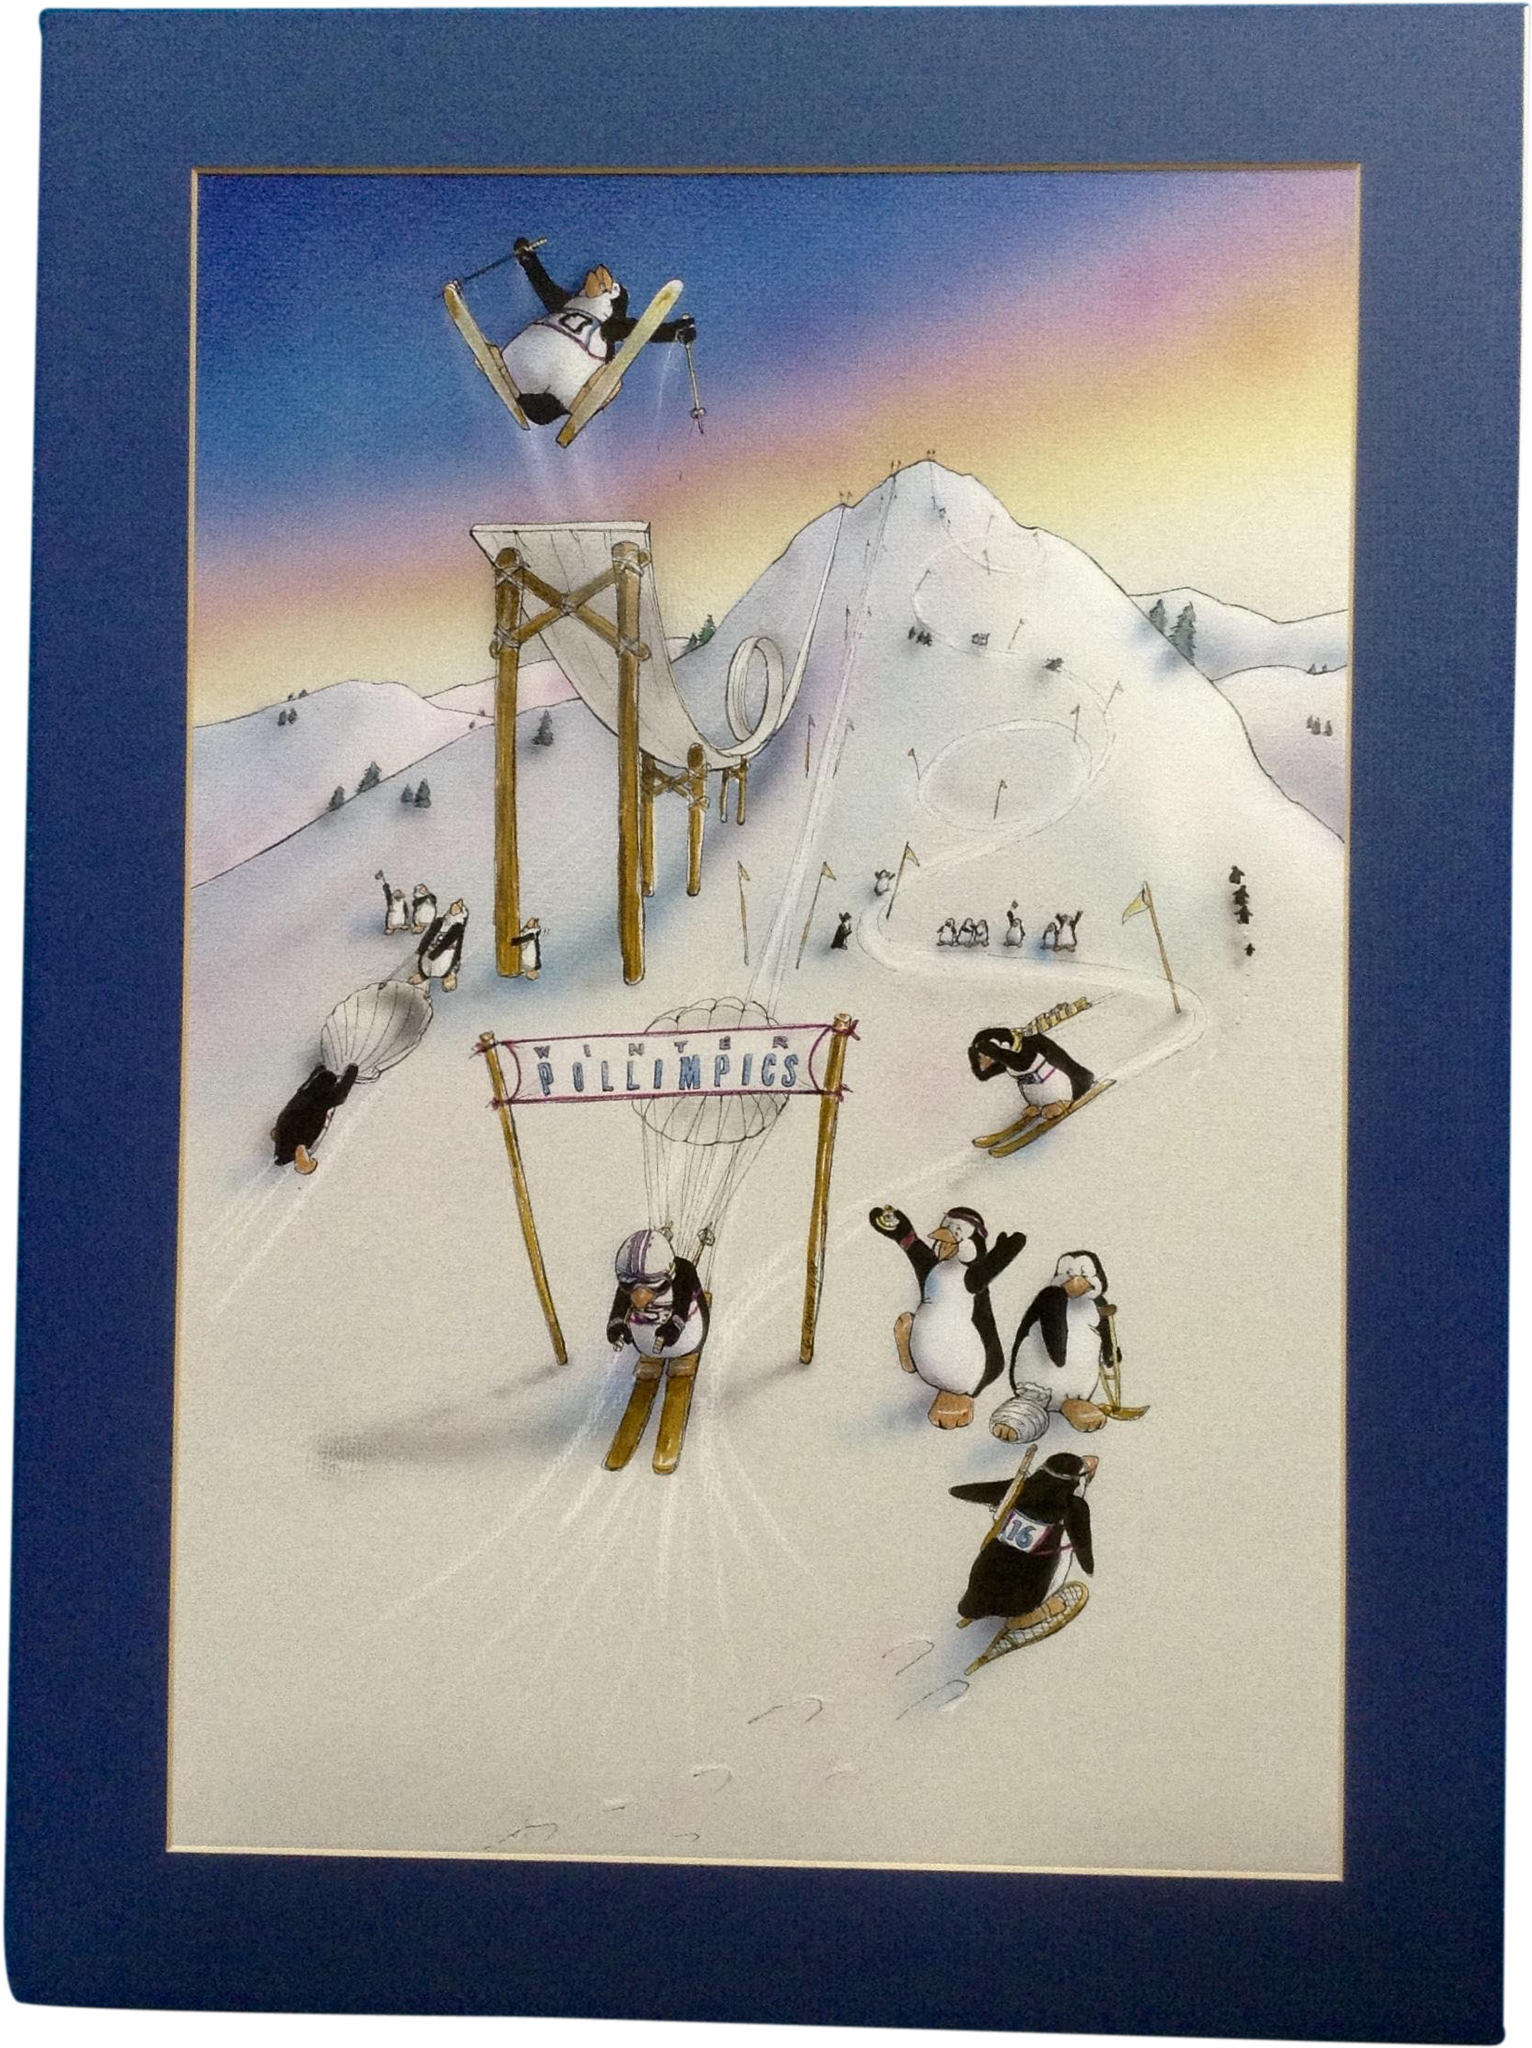 G Johns, Winter Olympics Pollimpics Penguins Skiing - Watercolor Painting (2048x2048), Png Download